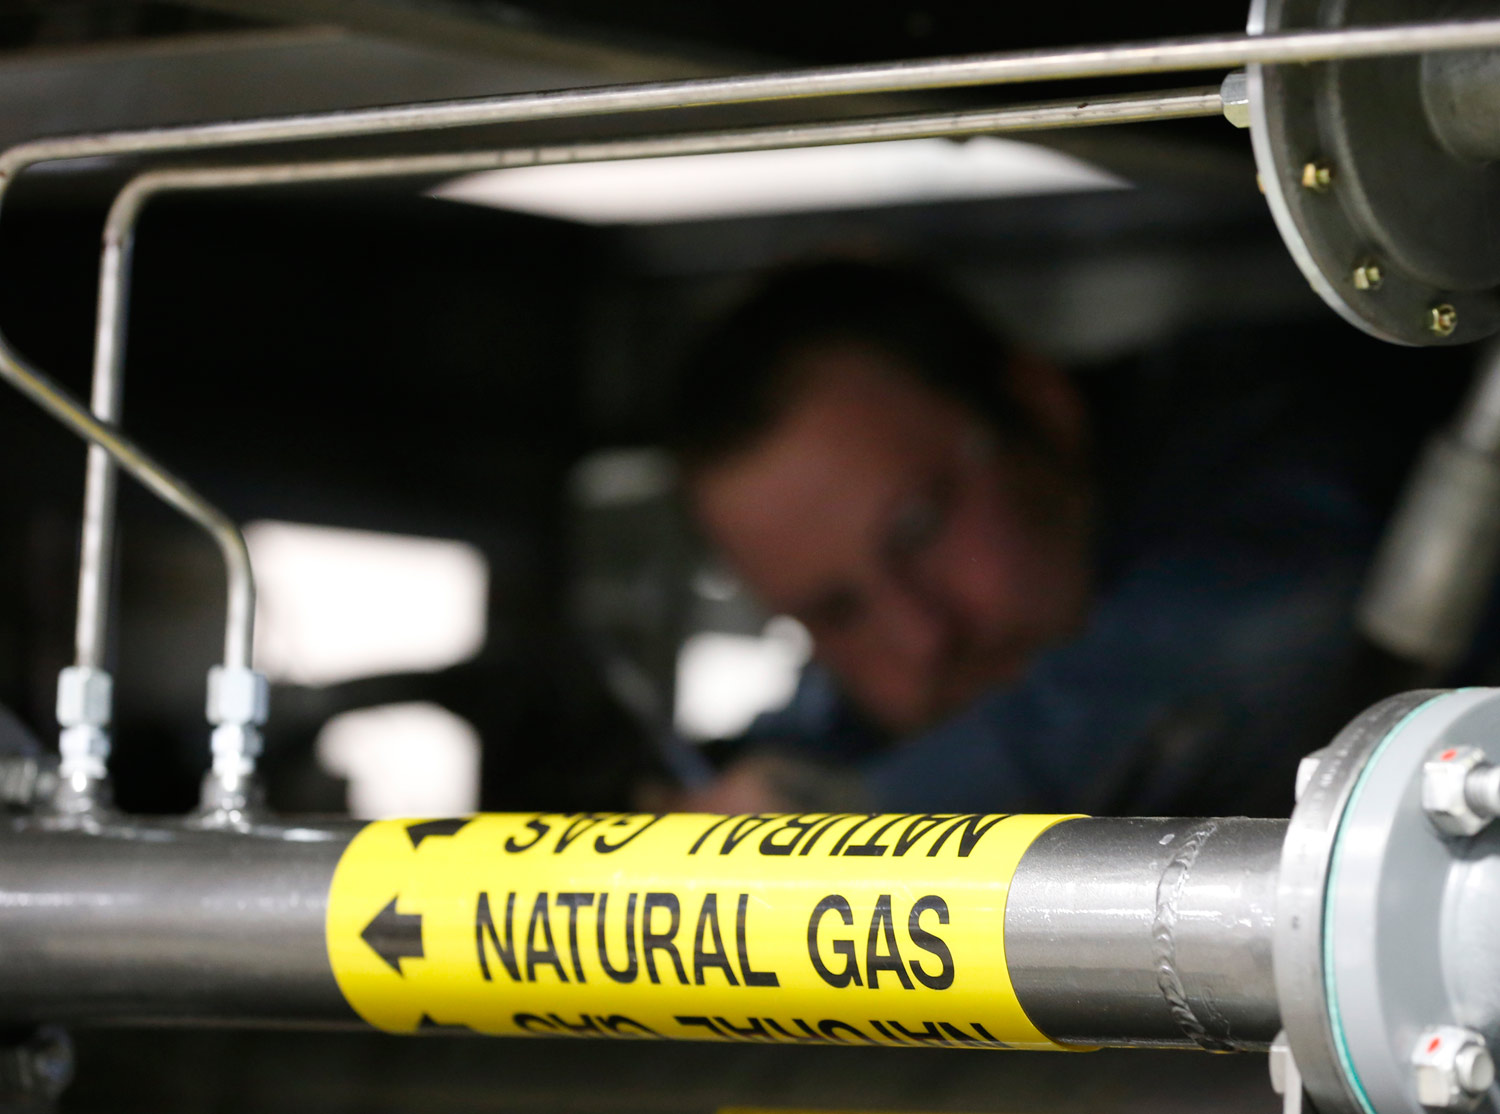 Why Is a Congressional Hearing on Natural Gas Being Organized by Former Natural Gas Lobbyists?